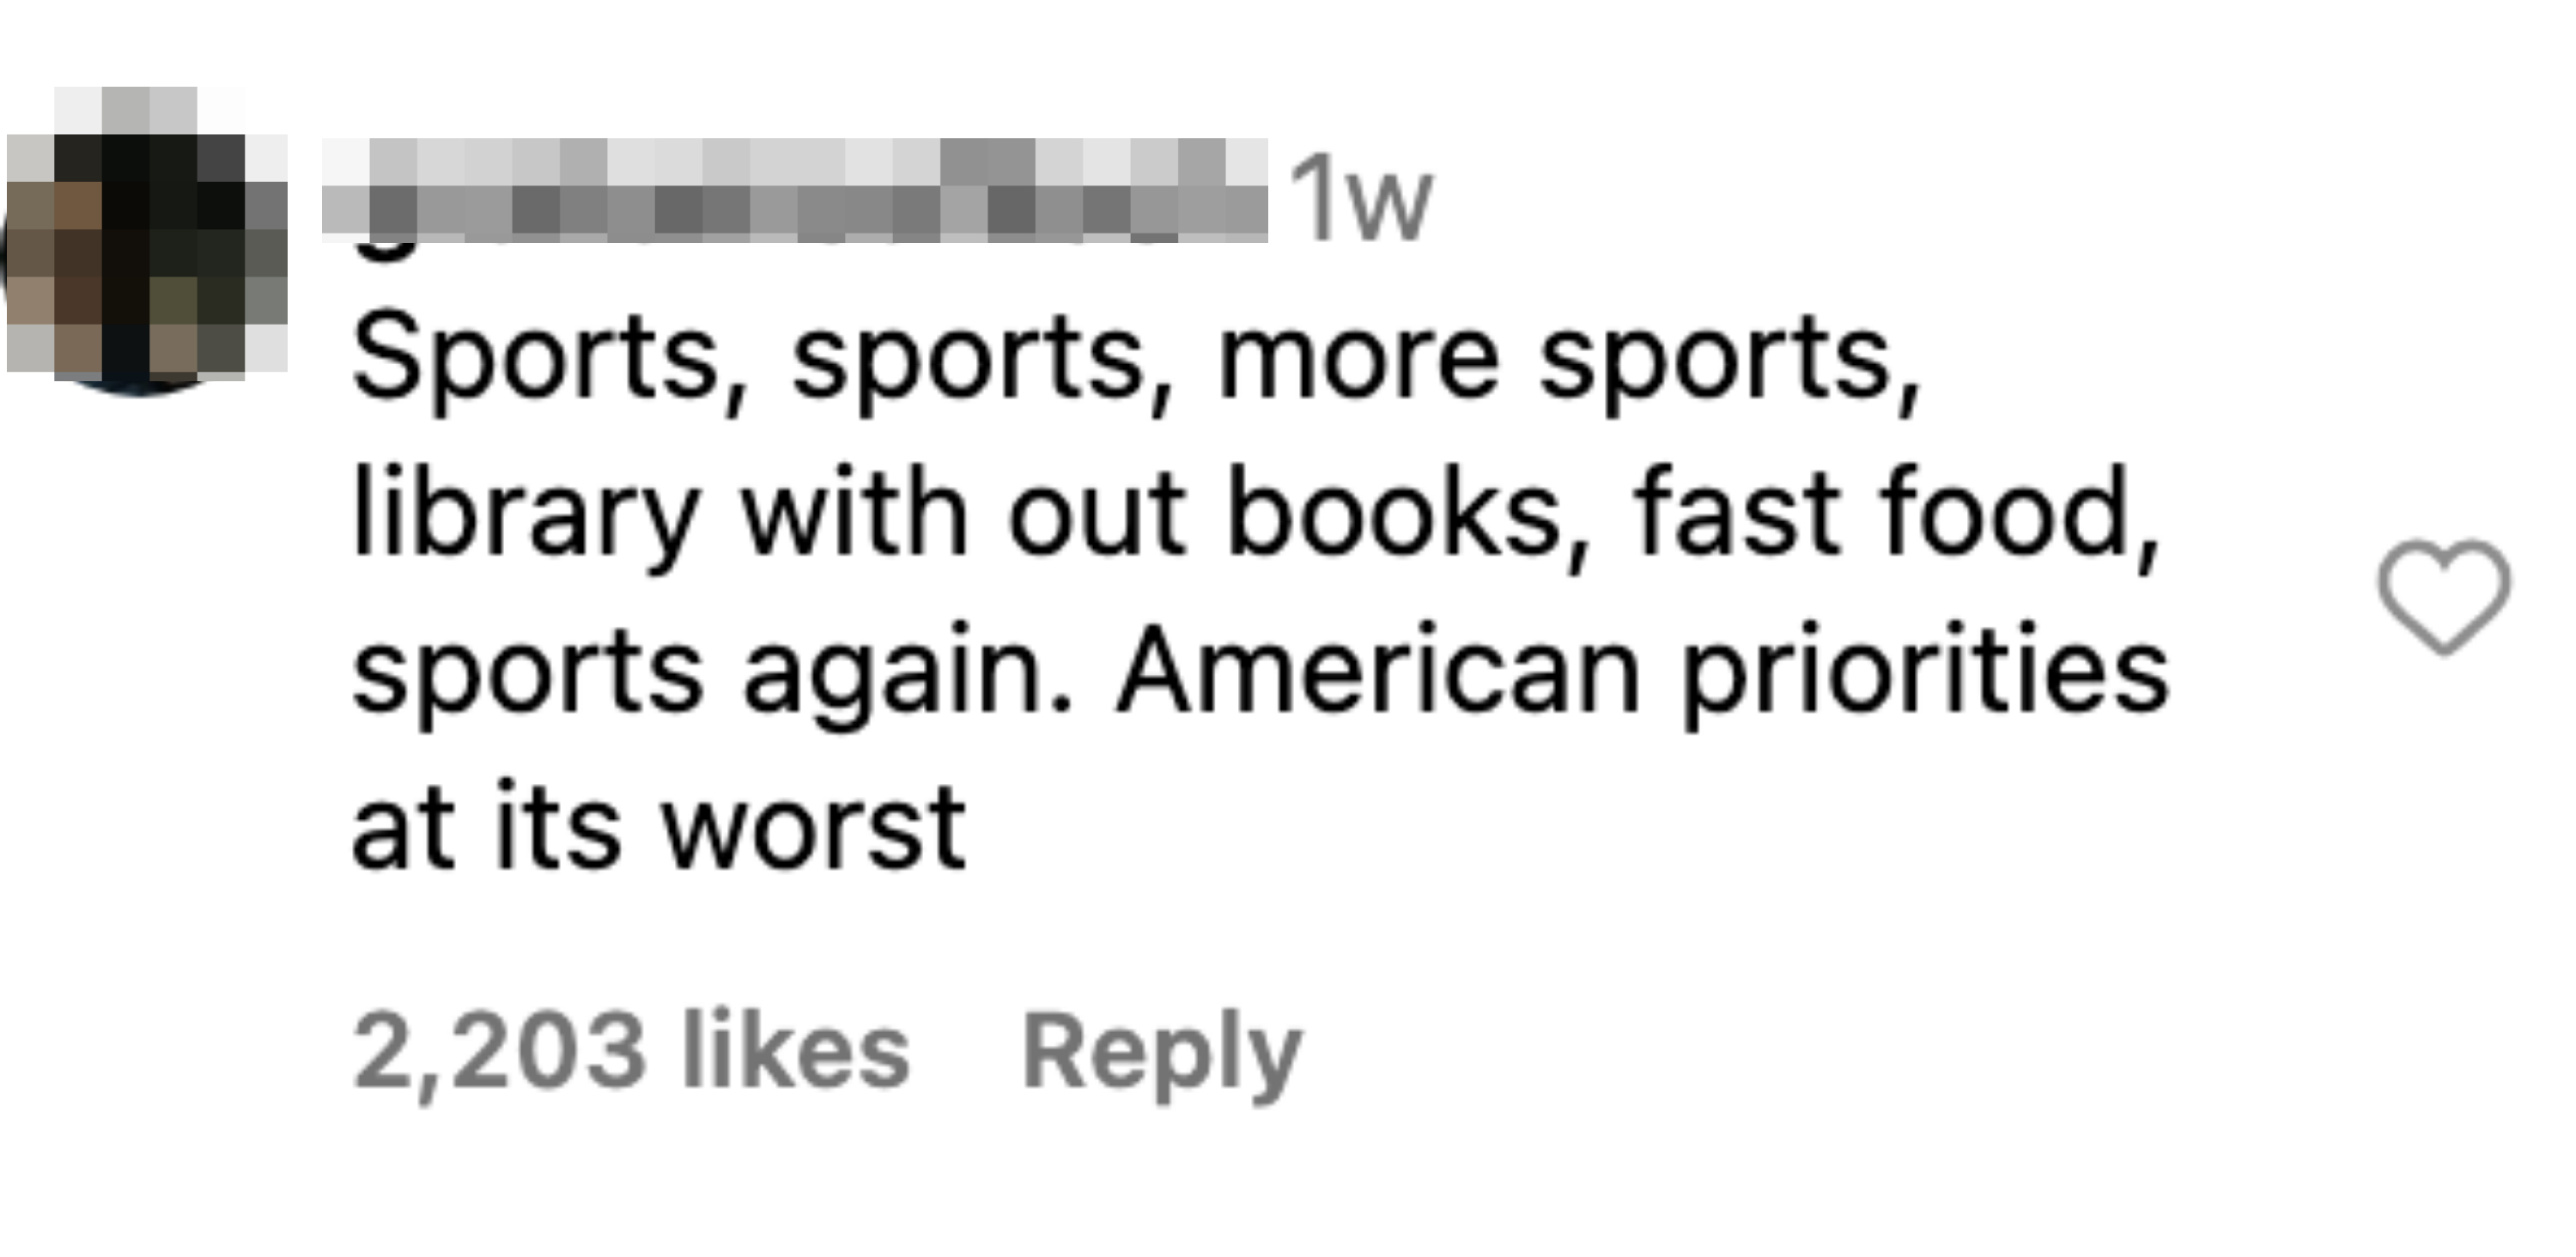 &quot;Sports, sports, more sports, library without books, fast food, sports again. American priorities at its worst.&quot;